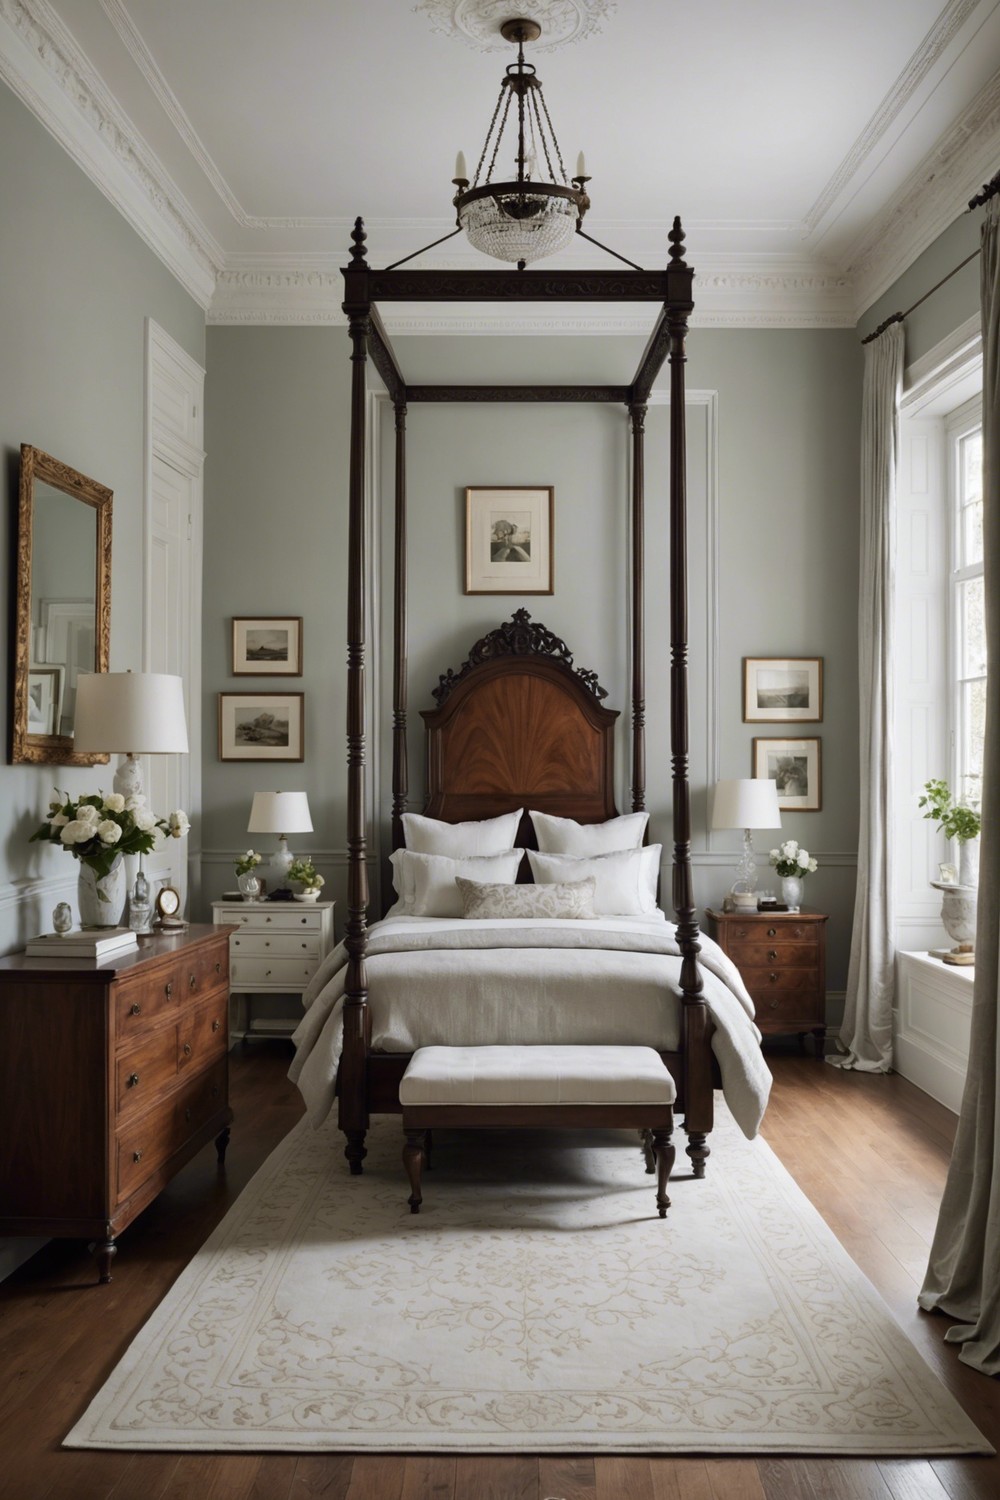 Restraint and Reserve: A Minimalist Victorian Bedroom